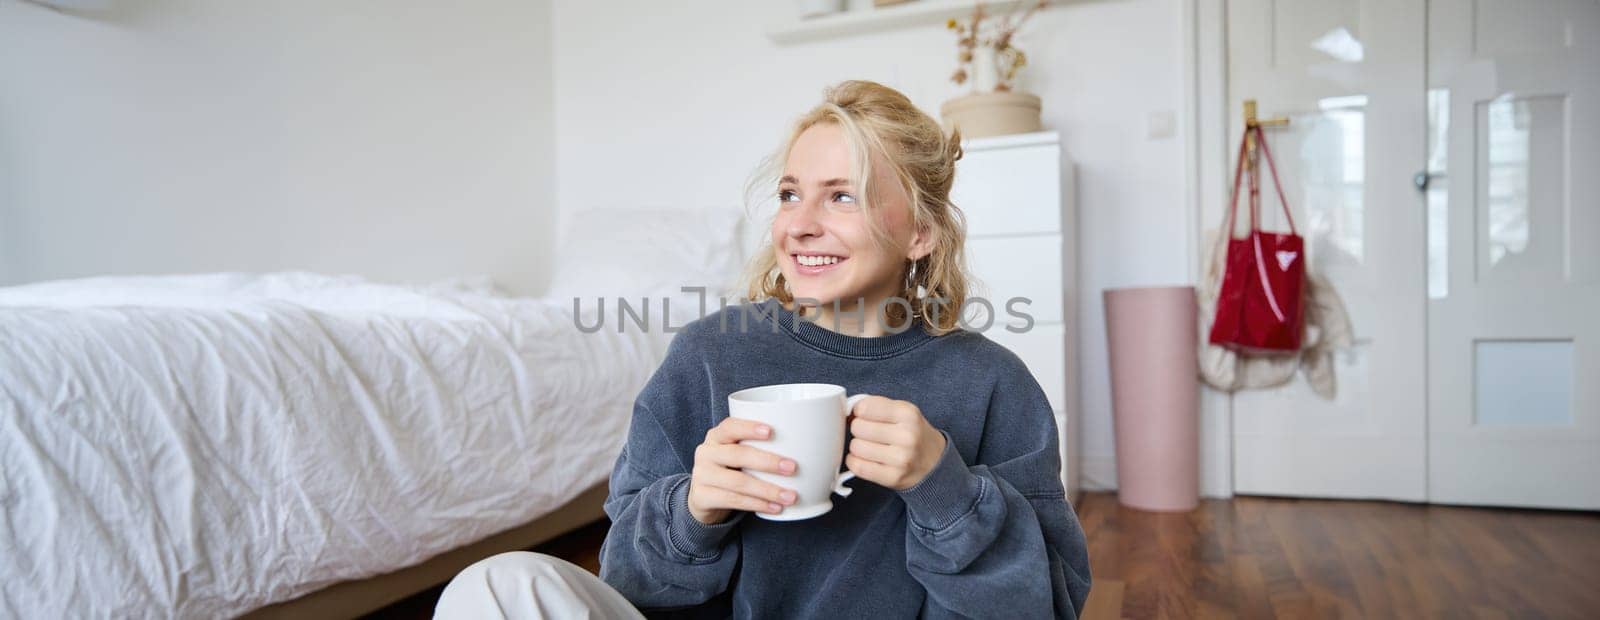 Lifestyle portrait of young woman sitting on bedroom floor with cup of tea, drinking from big white mug and looking aside, smiling happily by Benzoix